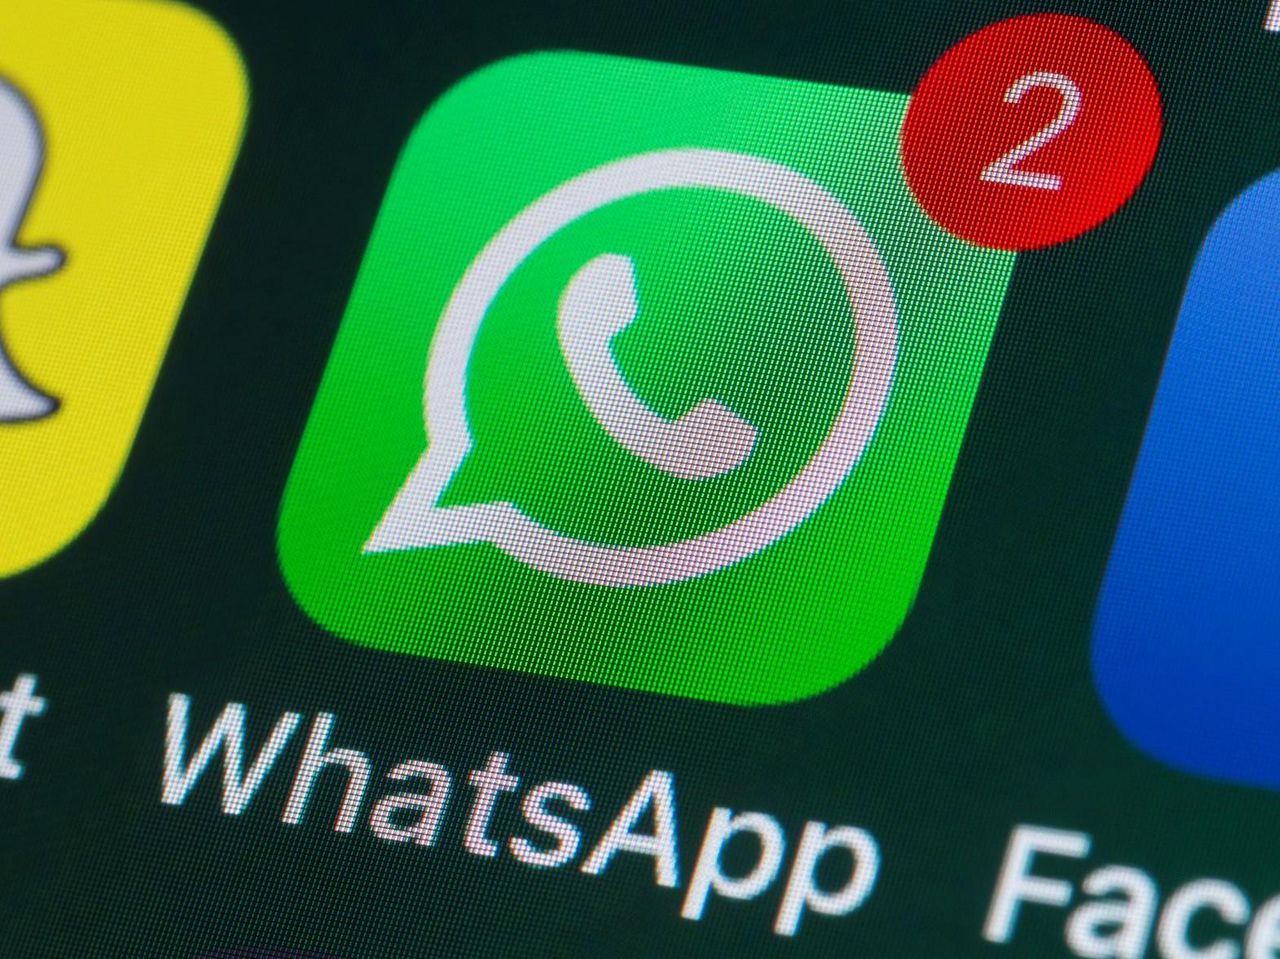 Latest Whatsapp update will disable app on older devices. Image via The Independent.